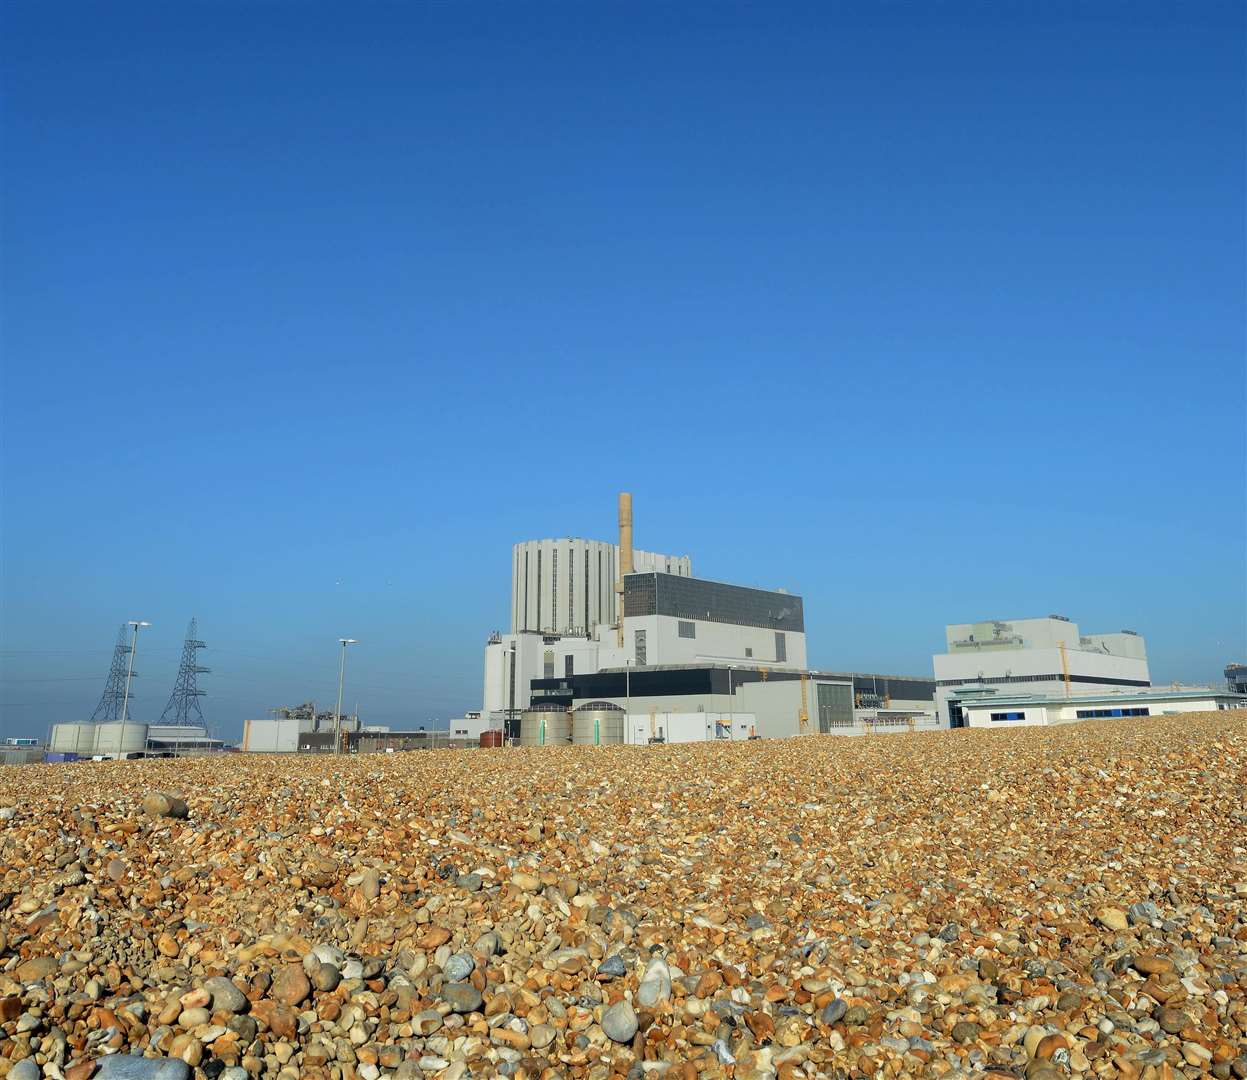 Dungeness B power station in Kent